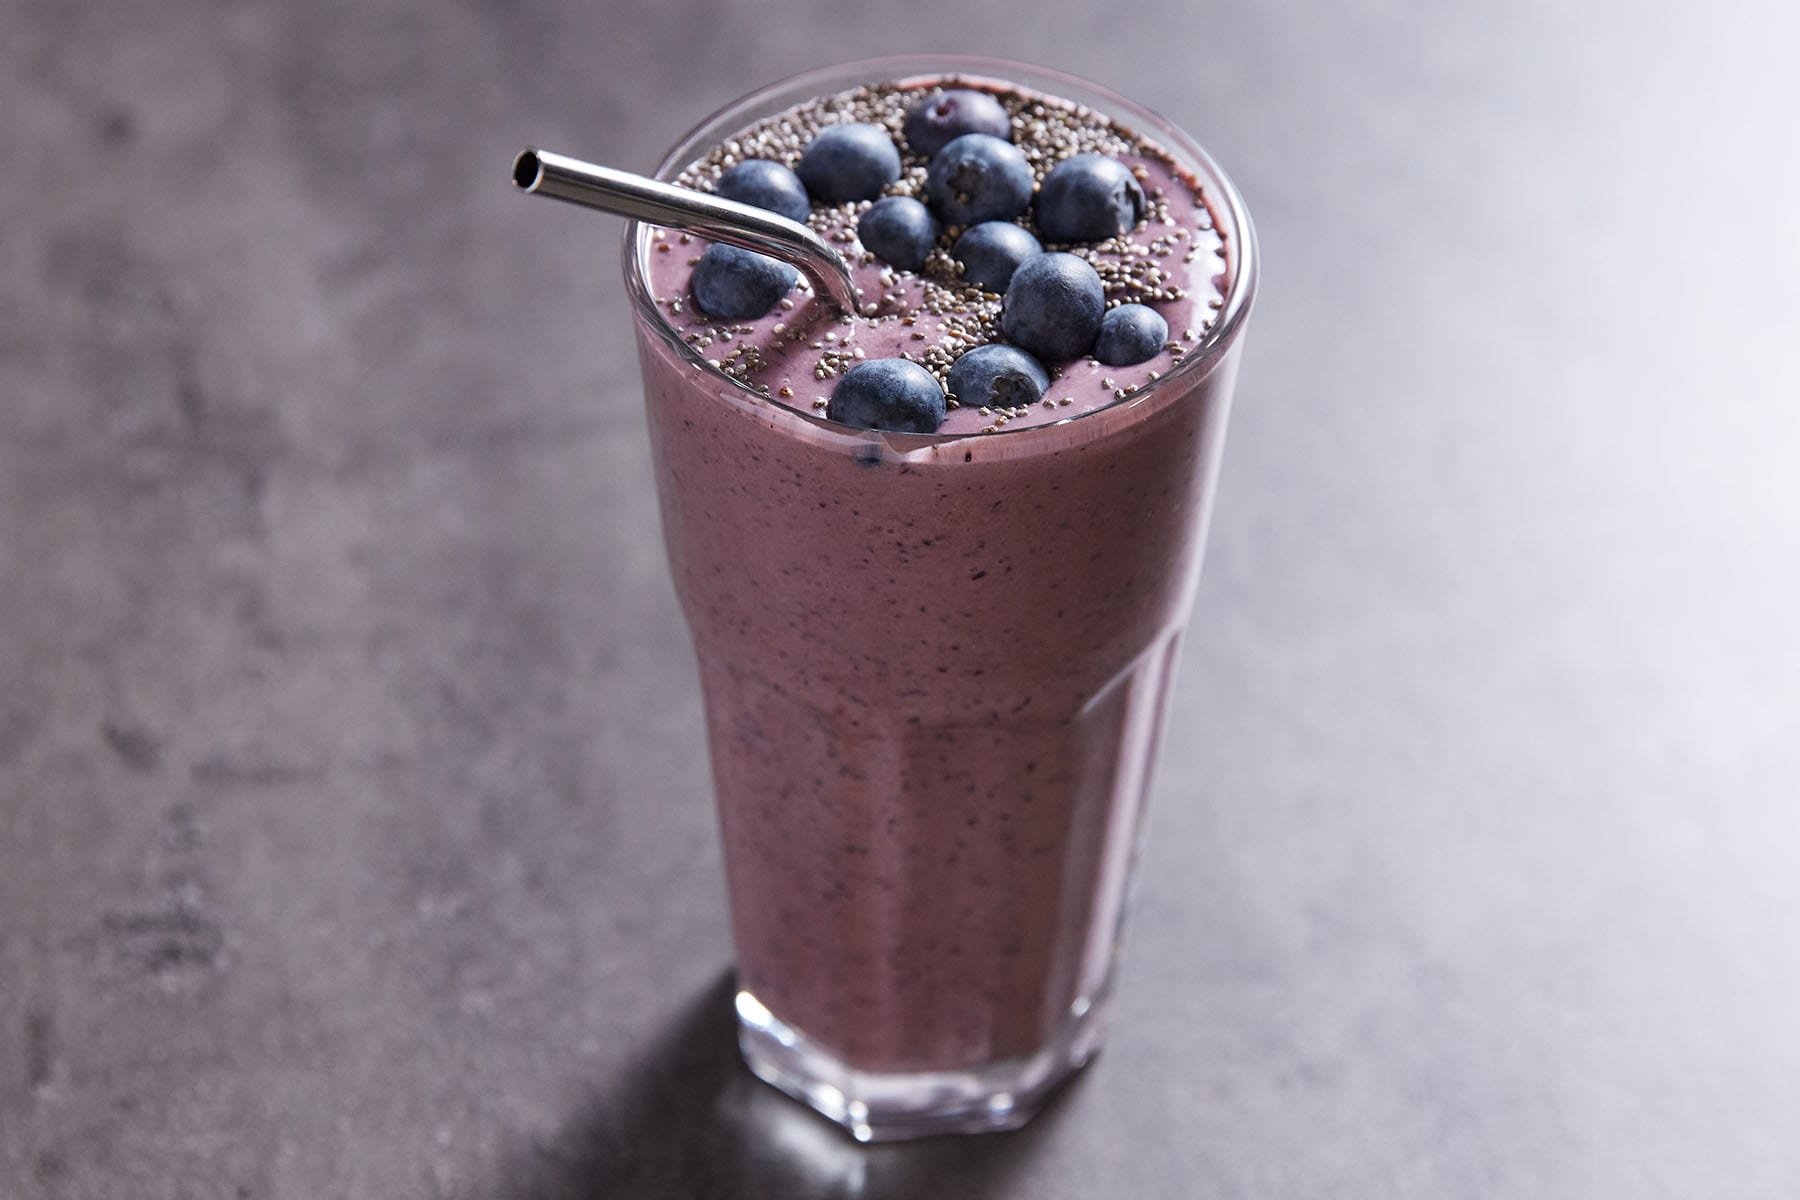 Zack George’s Supercharged Smoothie